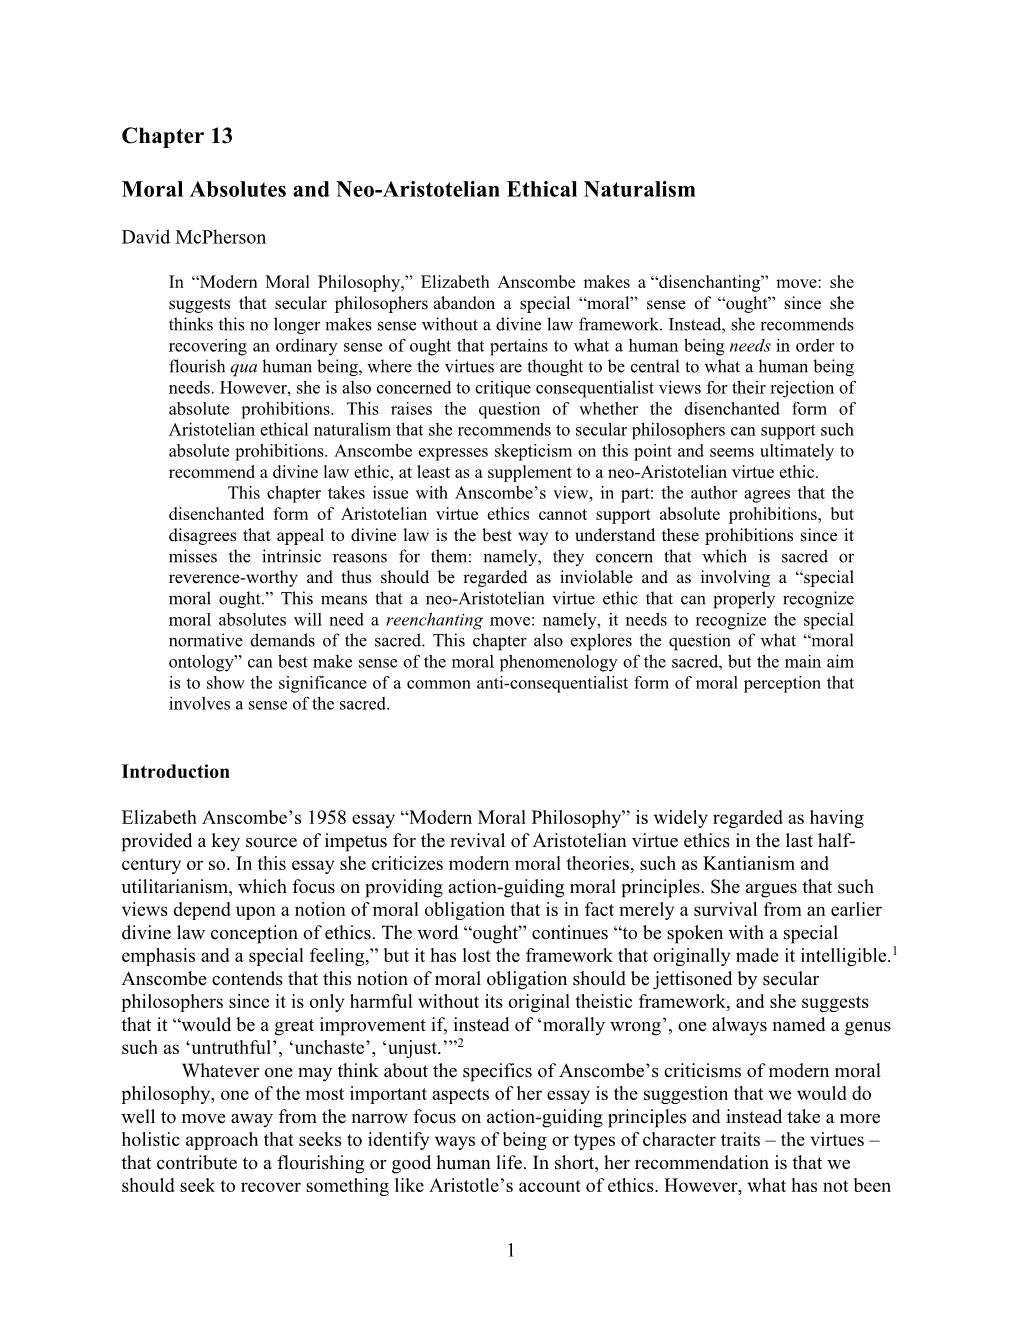 Chapter 13 Moral Absolutes and Neo-Aristotelian Ethical Naturalism